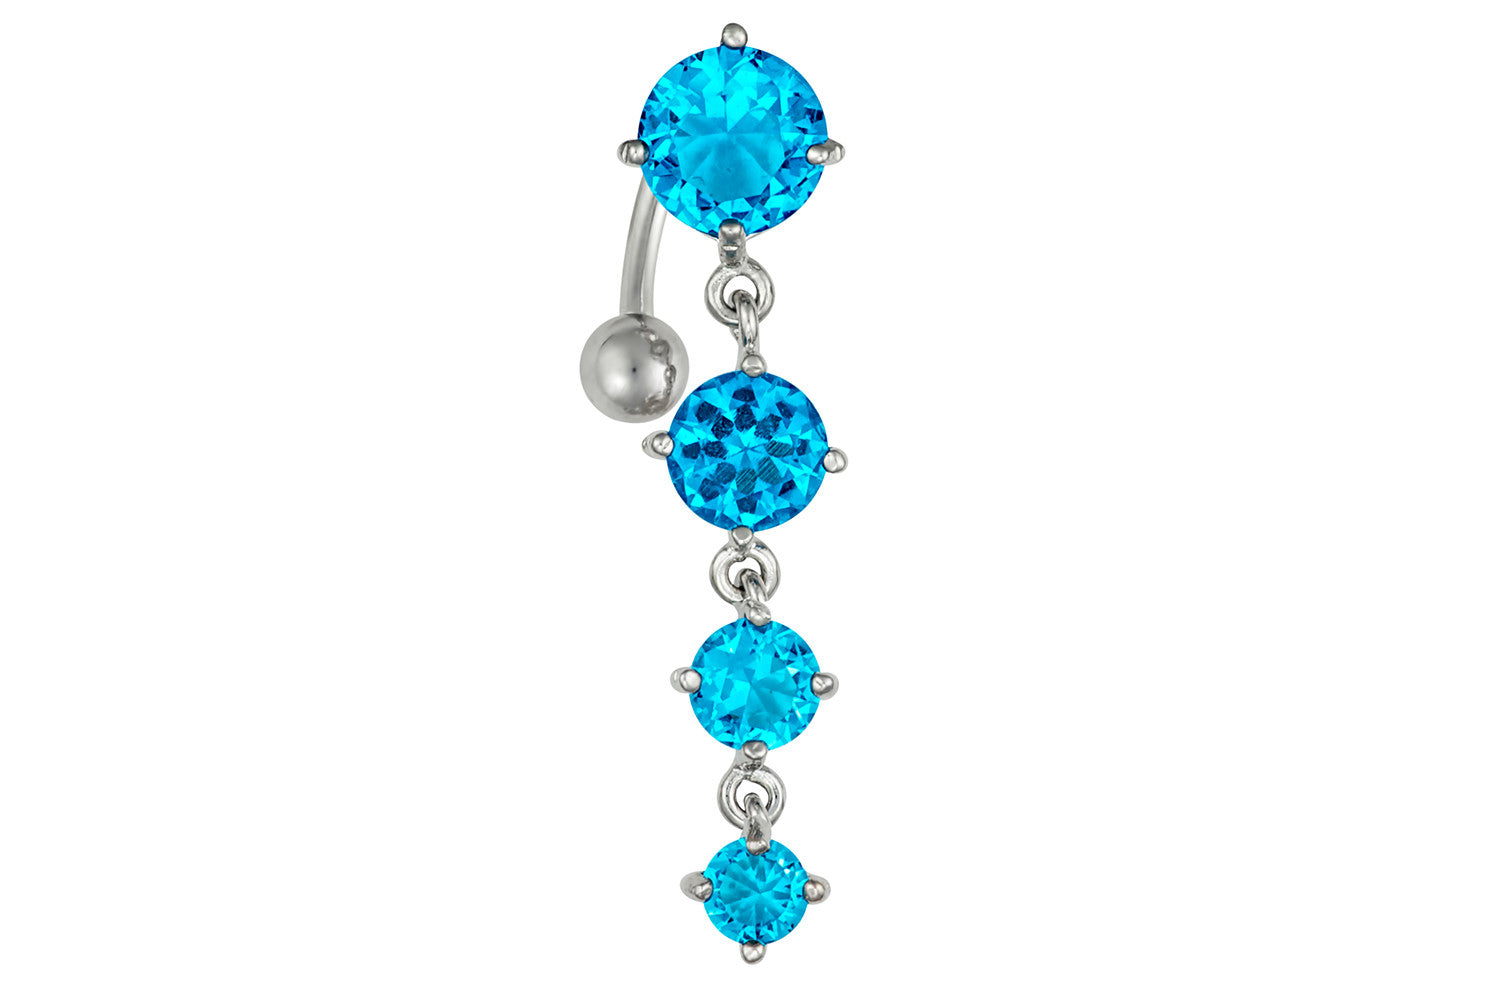 This 14 gauge sexy dangle belly ring is made with surgical grade 316L stainless steel. The barbell is 3/8" long and the total dangle length of the four cascading crystals is 1 3/8".